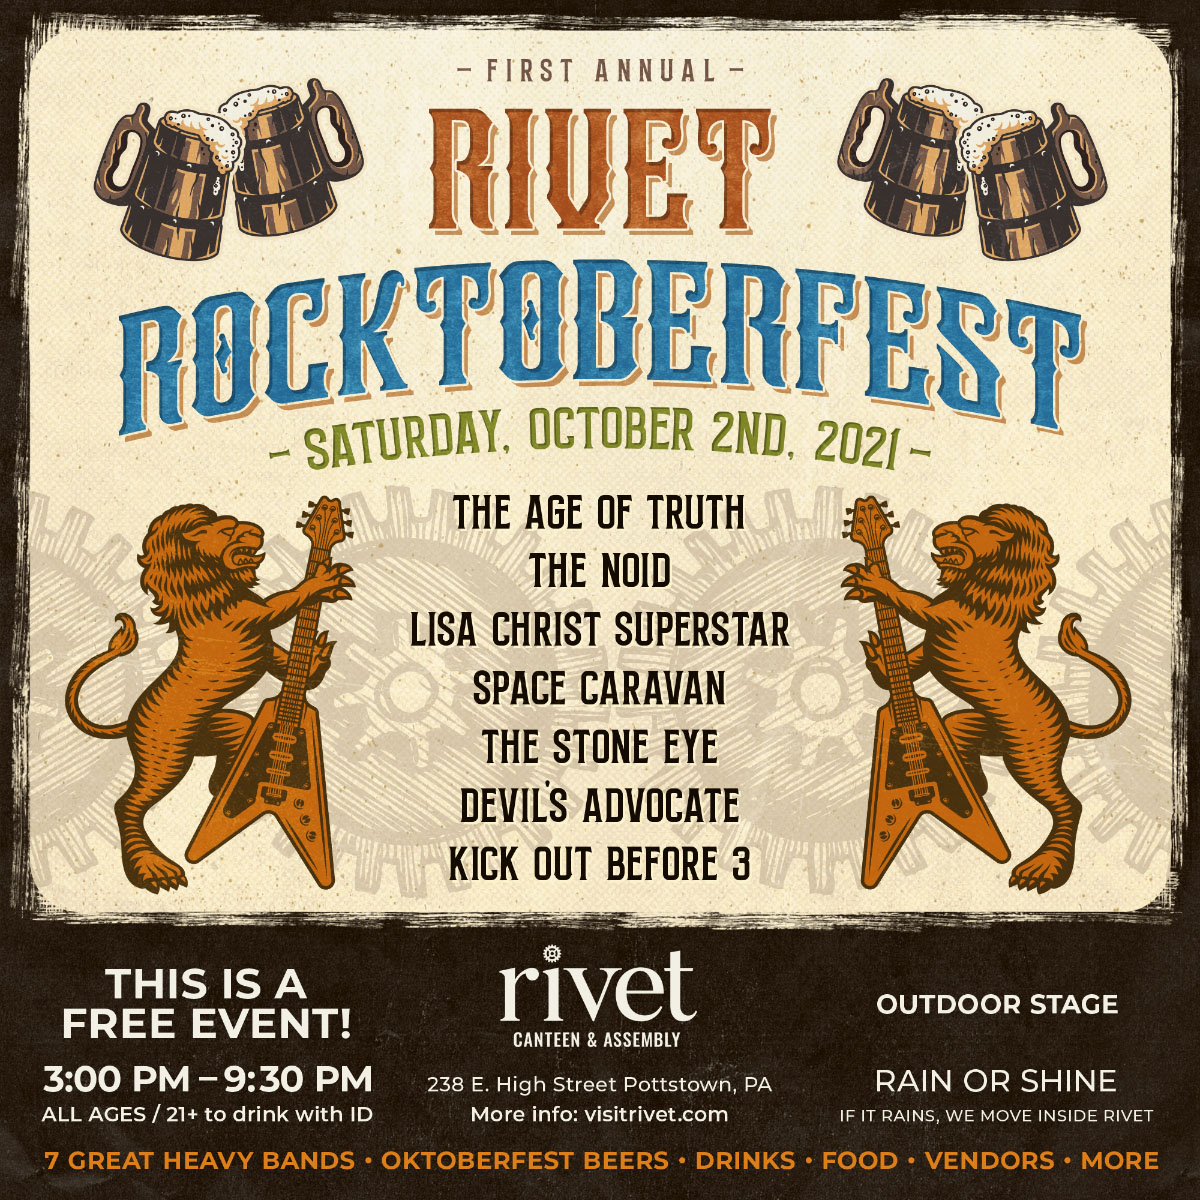 First annual Rivet Rocktoberfest with 7 great heavy rock bands, Oktoberfest beers, drinks, food, and more. This is a free event from 3:00 PM to 9:30 PM on Saturday, October 2nd, 2021.